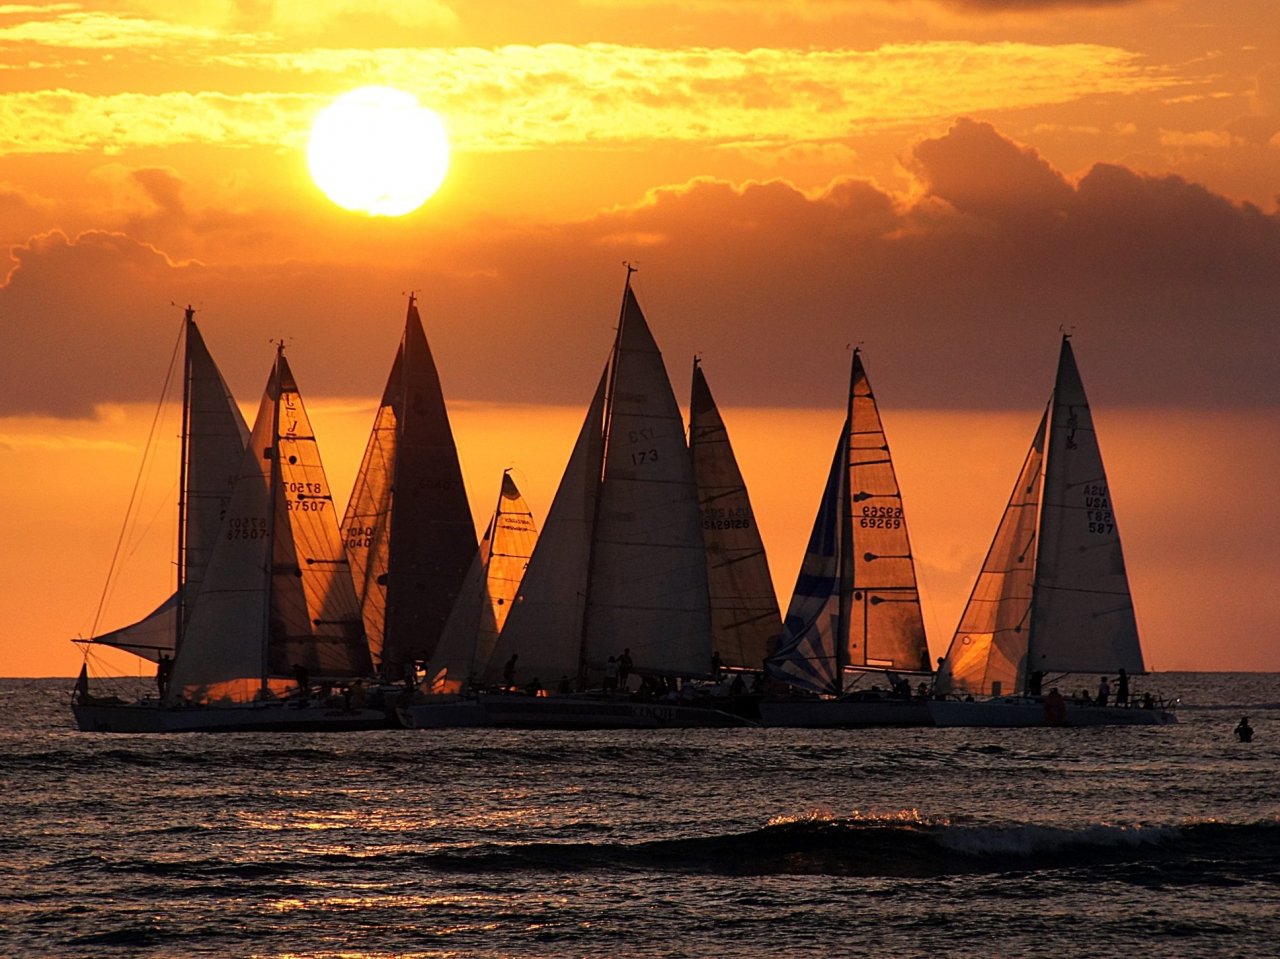 Yachts at the sunset jigsaw puzzle